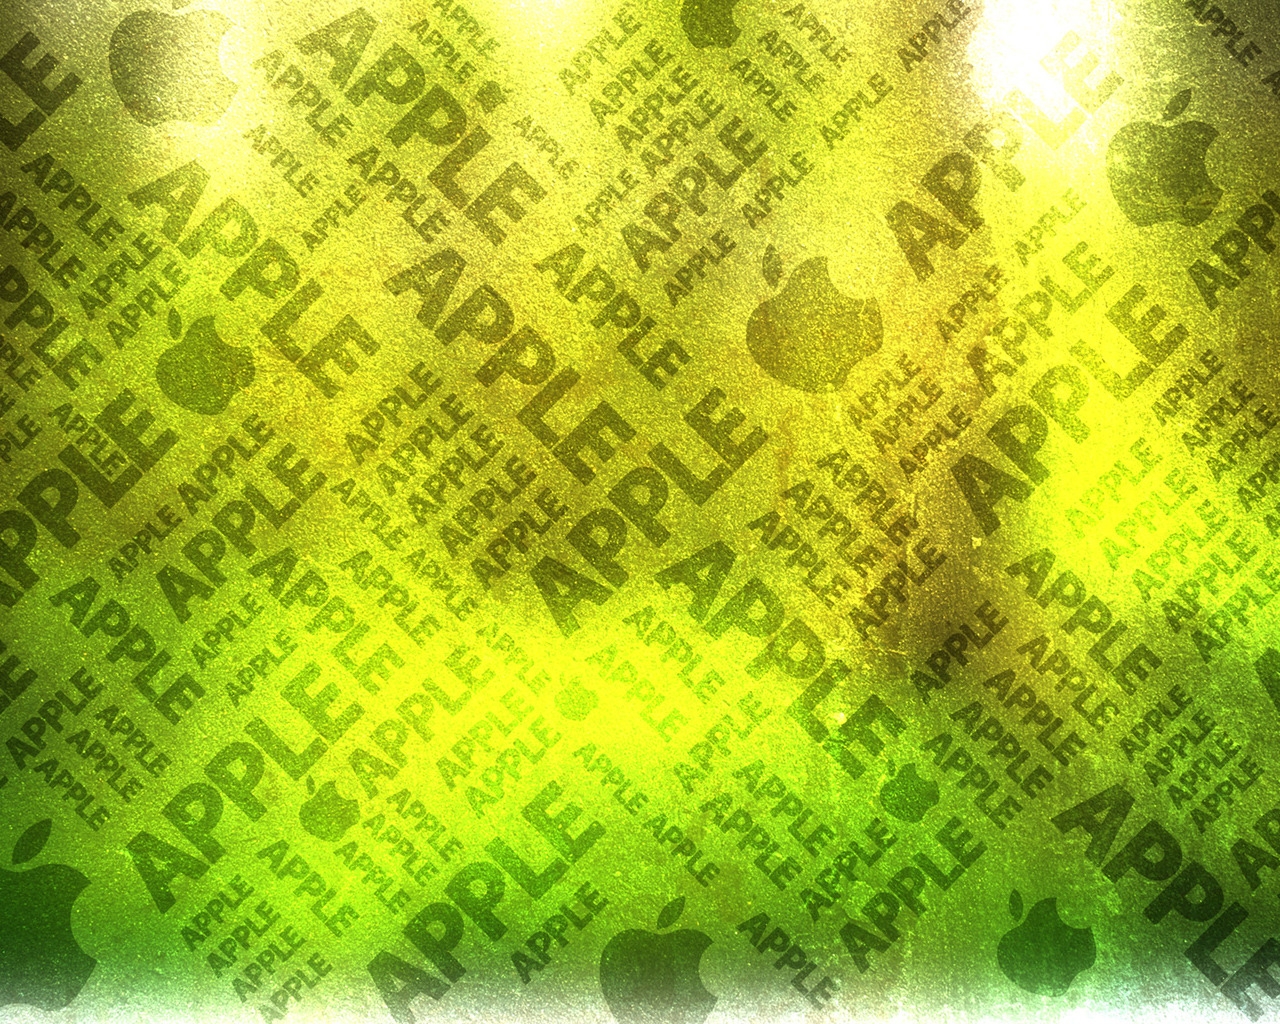 Green Apple for 1280 x 1024 resolution